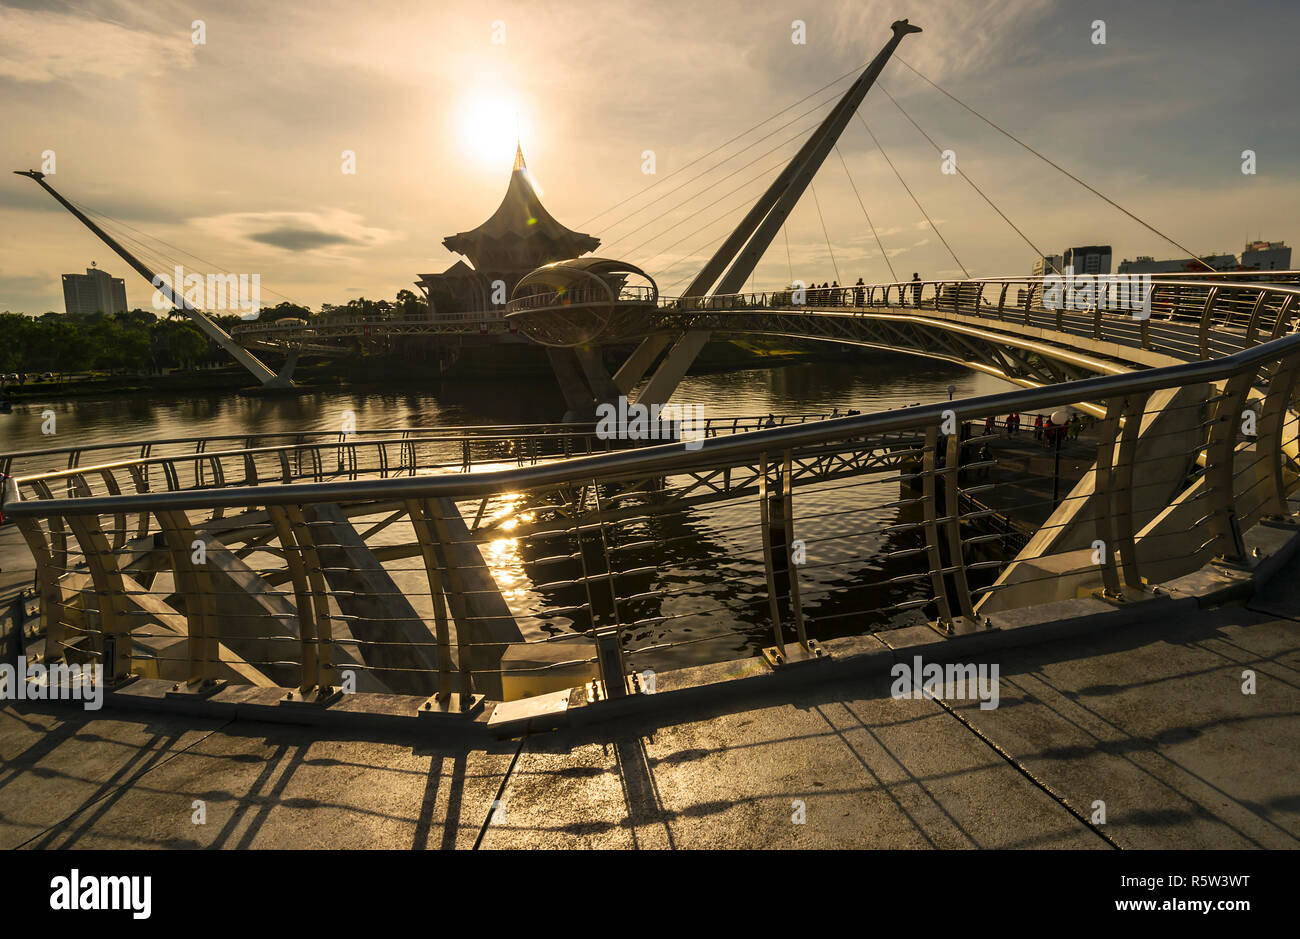 The Darul Hana Bridge in Kuching is the only pedestrian bridge that connects the North and South of Kuching at the moment. Stock Photo